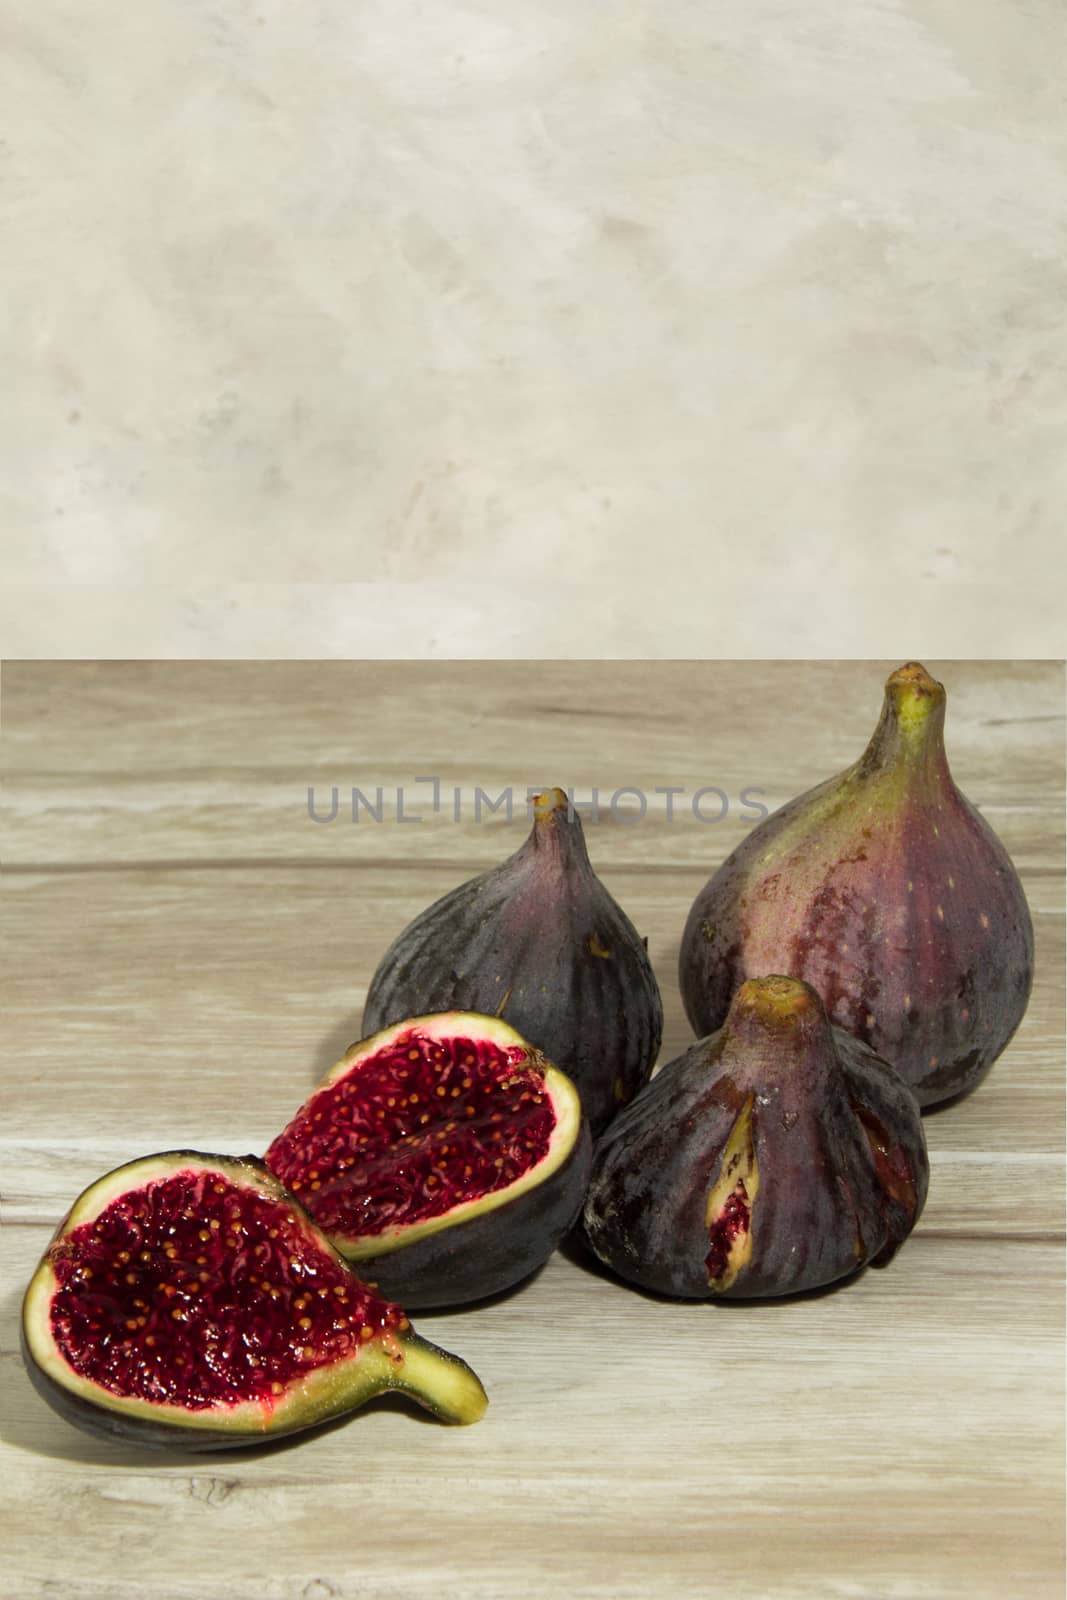 some mature purple figs on the table by Joanastockfoto